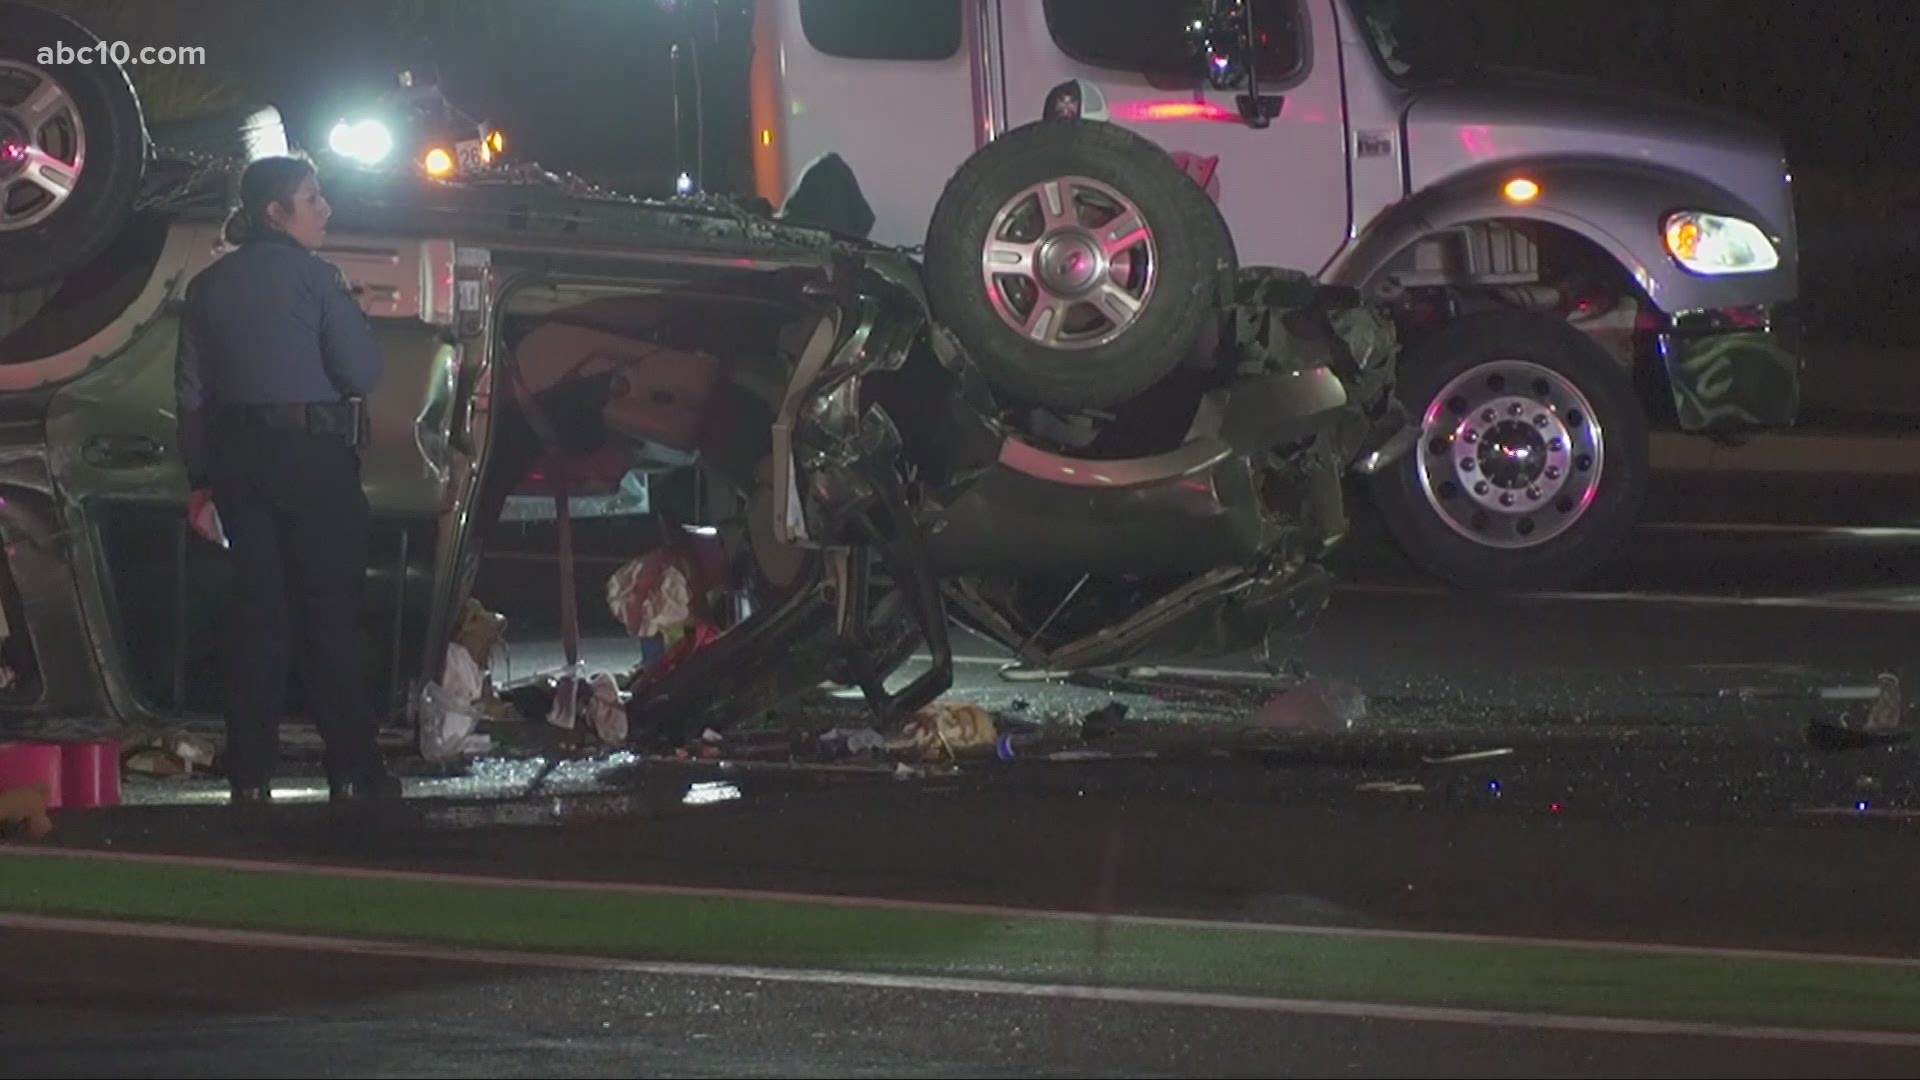 Fire department officials told ABC10 they learned at about 9:03 p.m. that three people were trapped inside a car near Elk Grove and Franklin Boulevards.